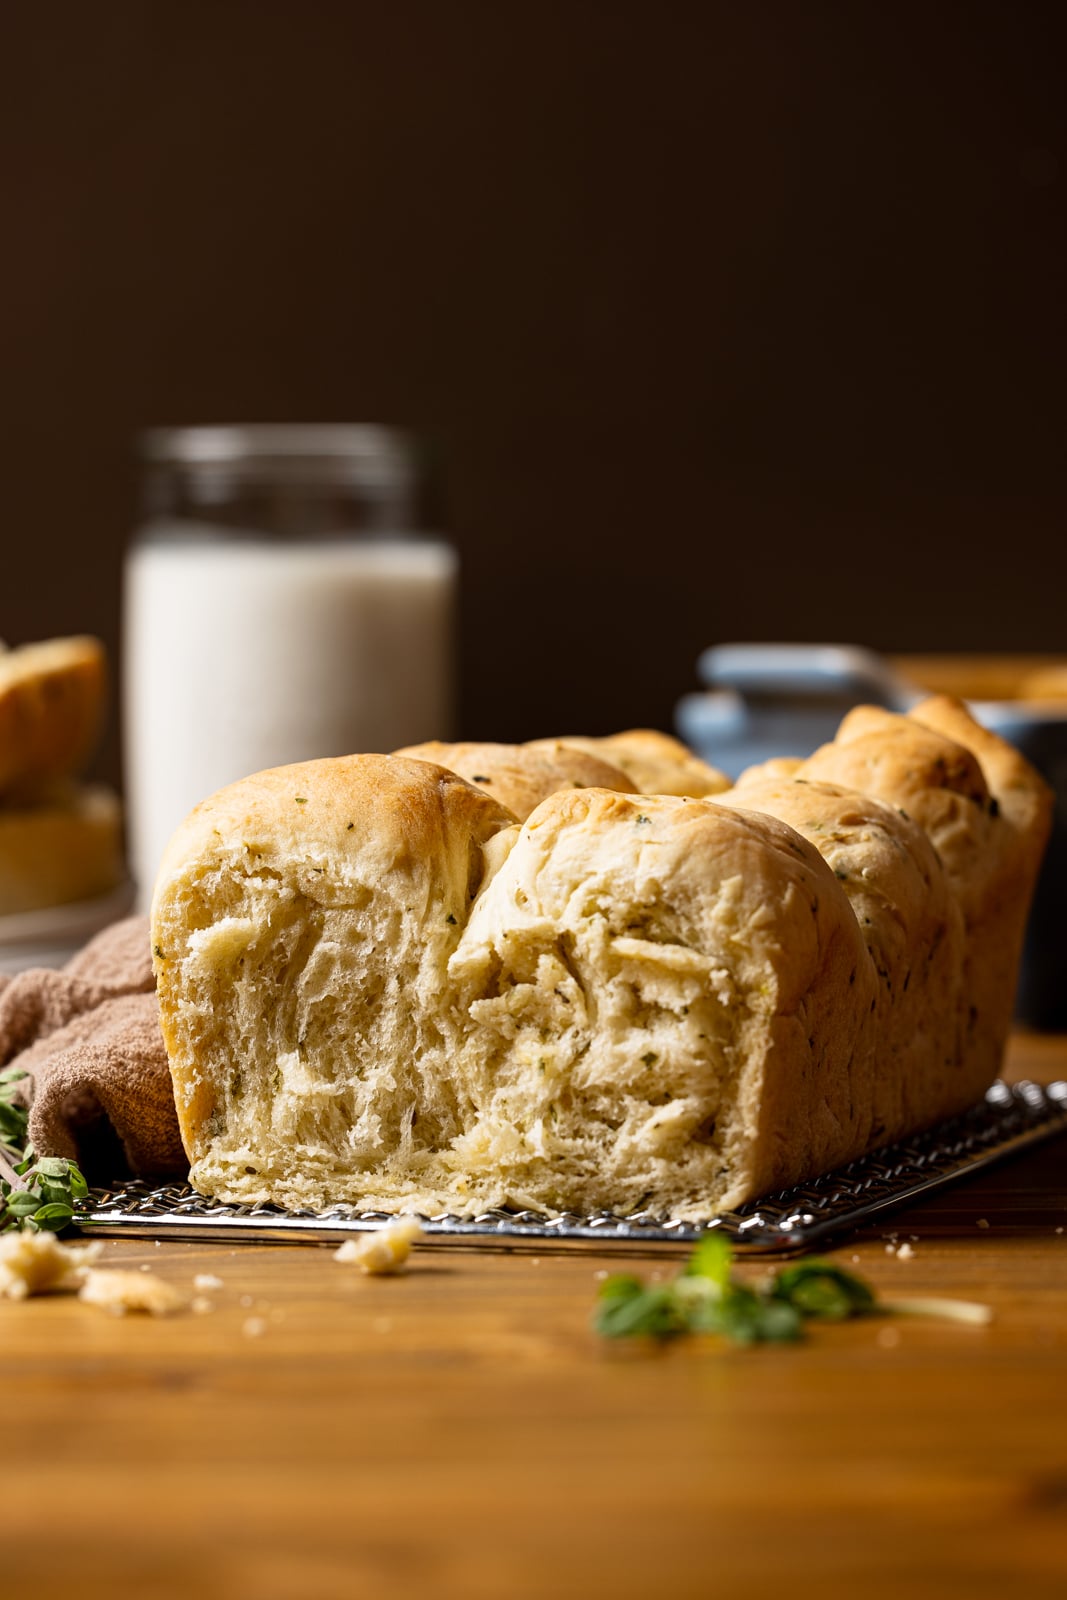 Baked bread with a slice removed on a silver tray on a brown wood table with a jar of milk in the background and brown napkin.